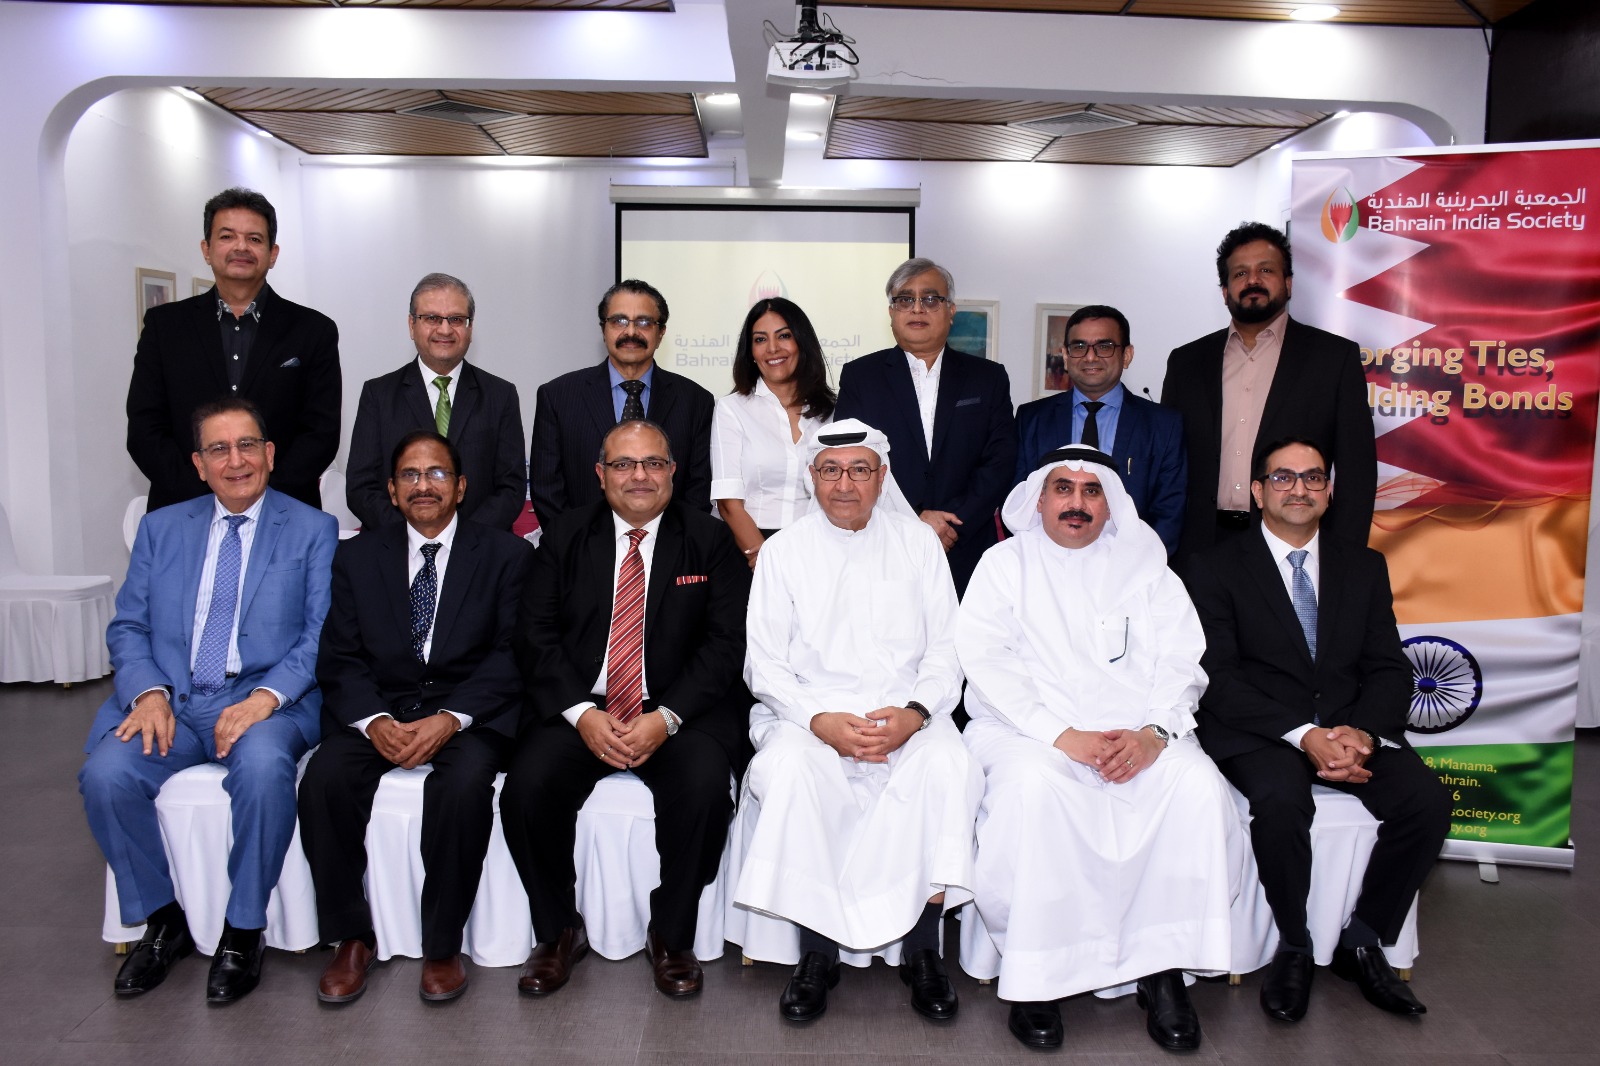 Bahrain India Society holds first physical board meeting since the pandemic